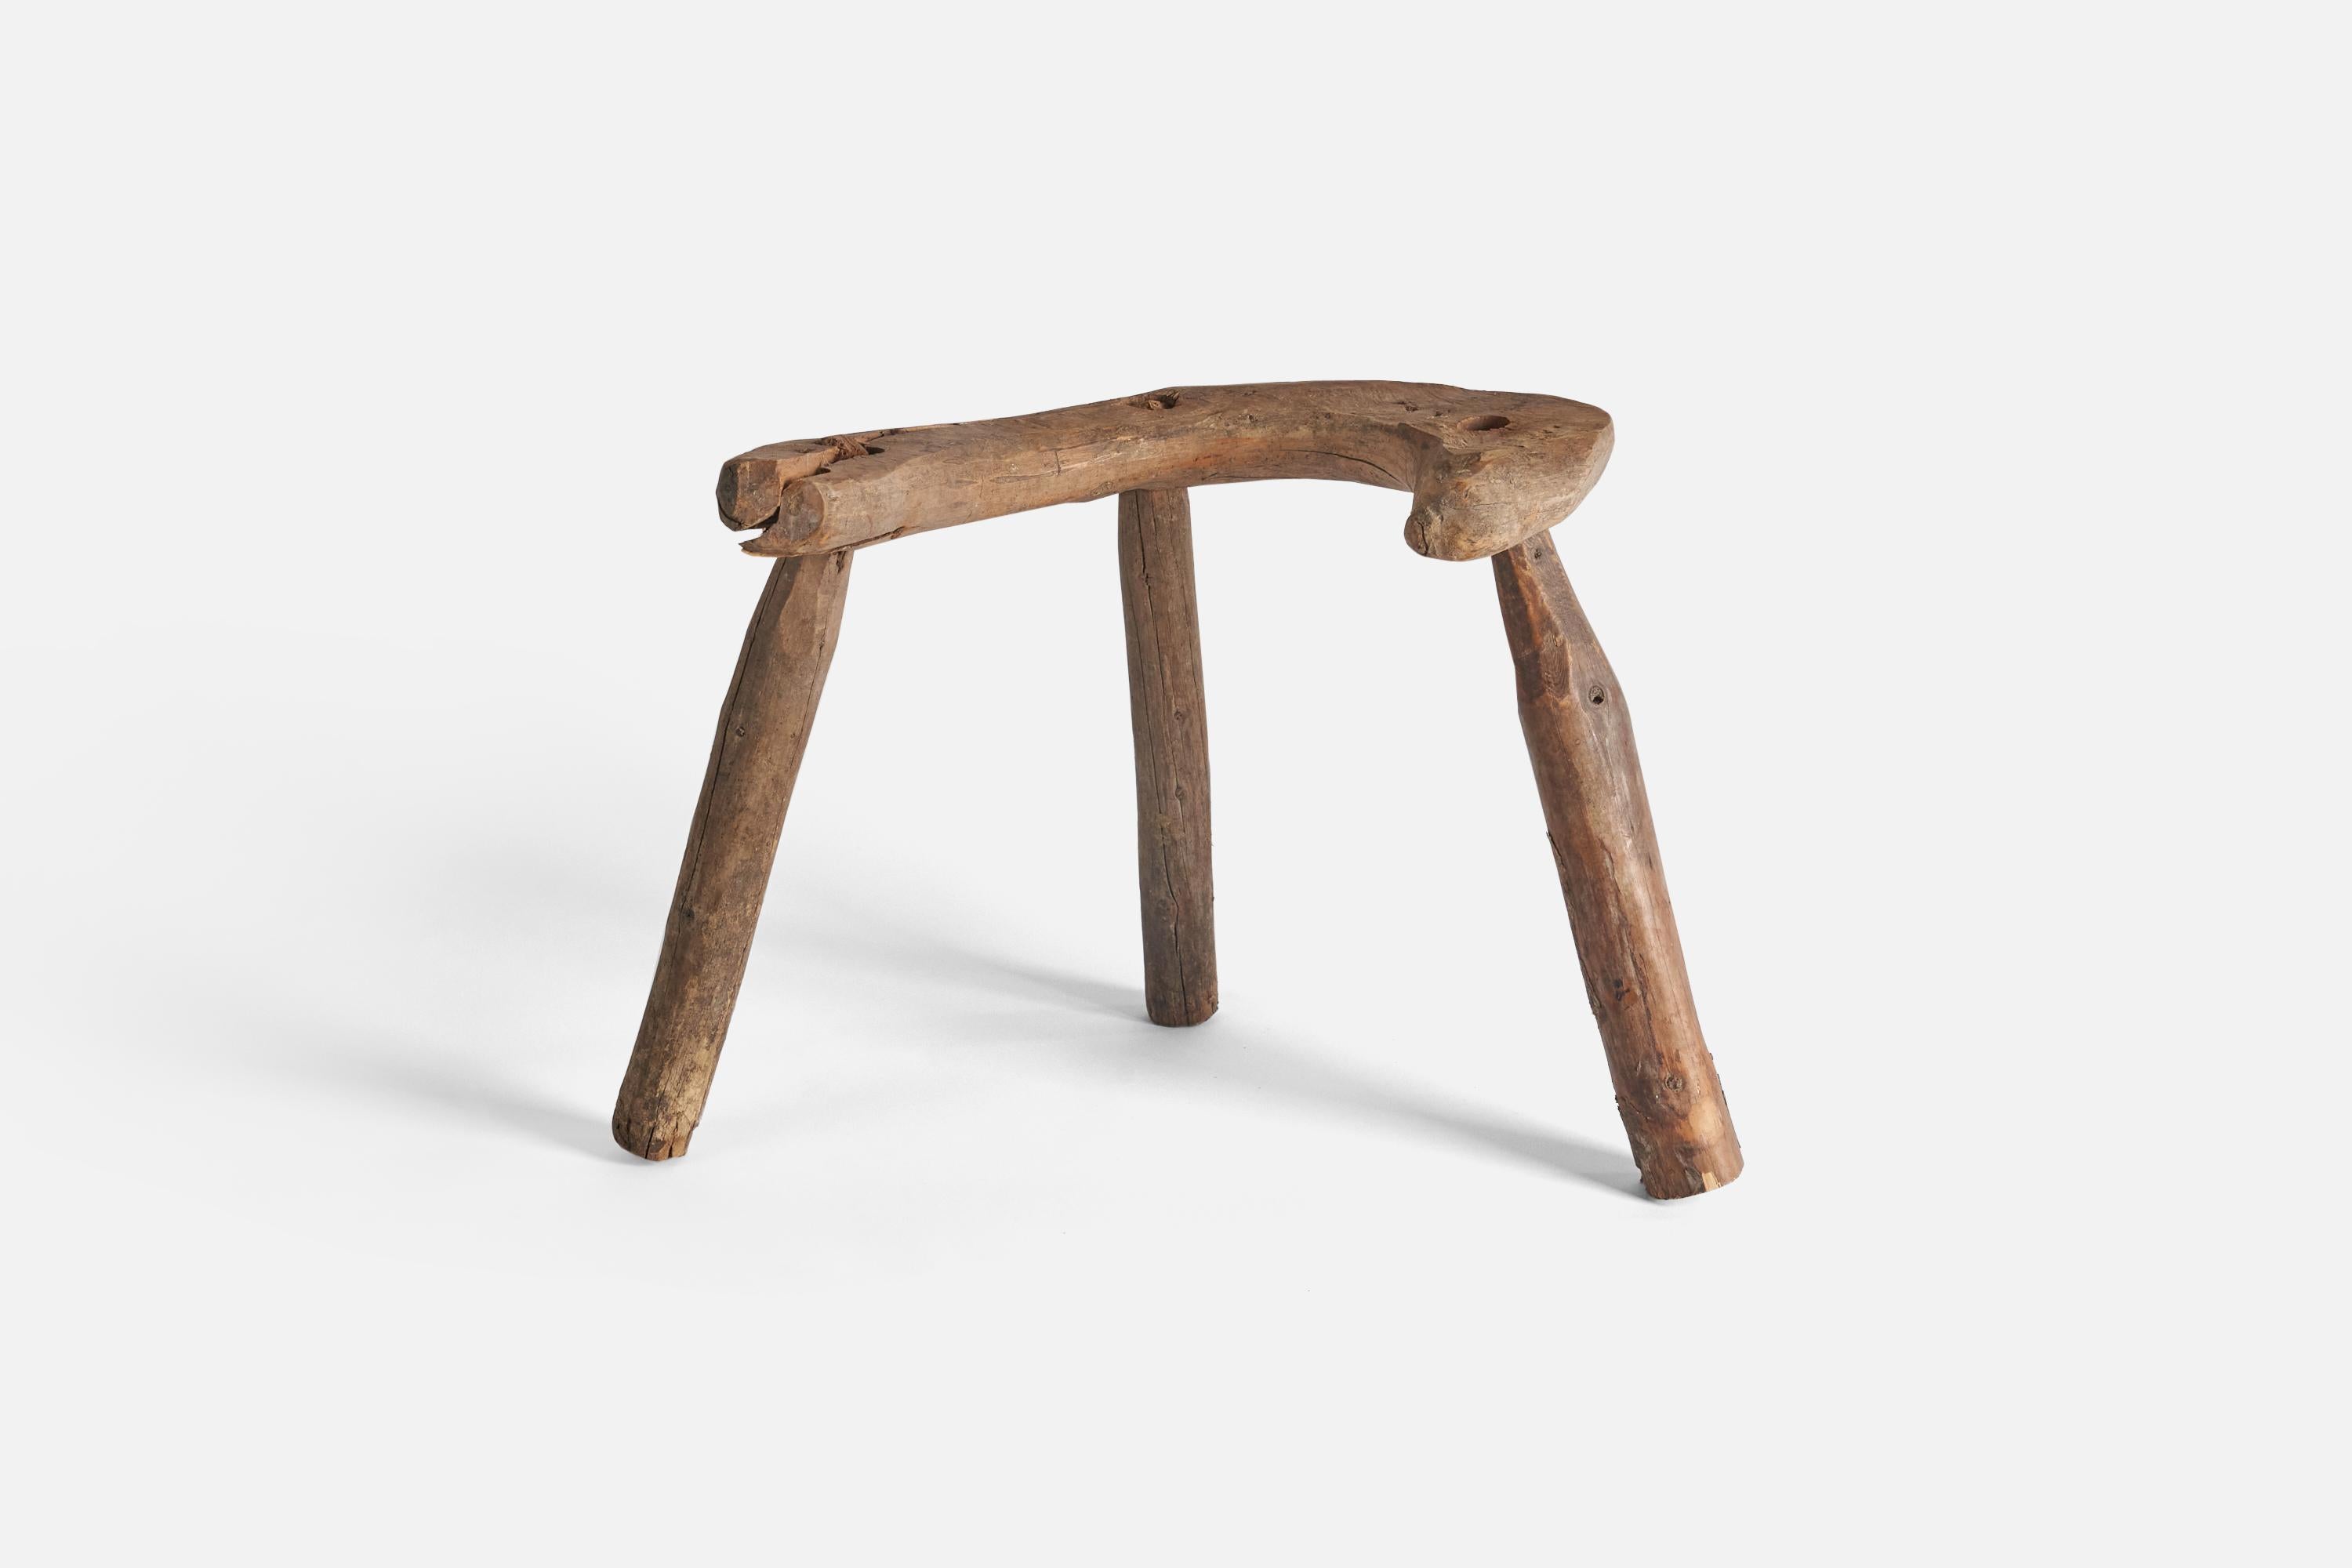 A wooden farmers stool produced in Sweden, 19th century.